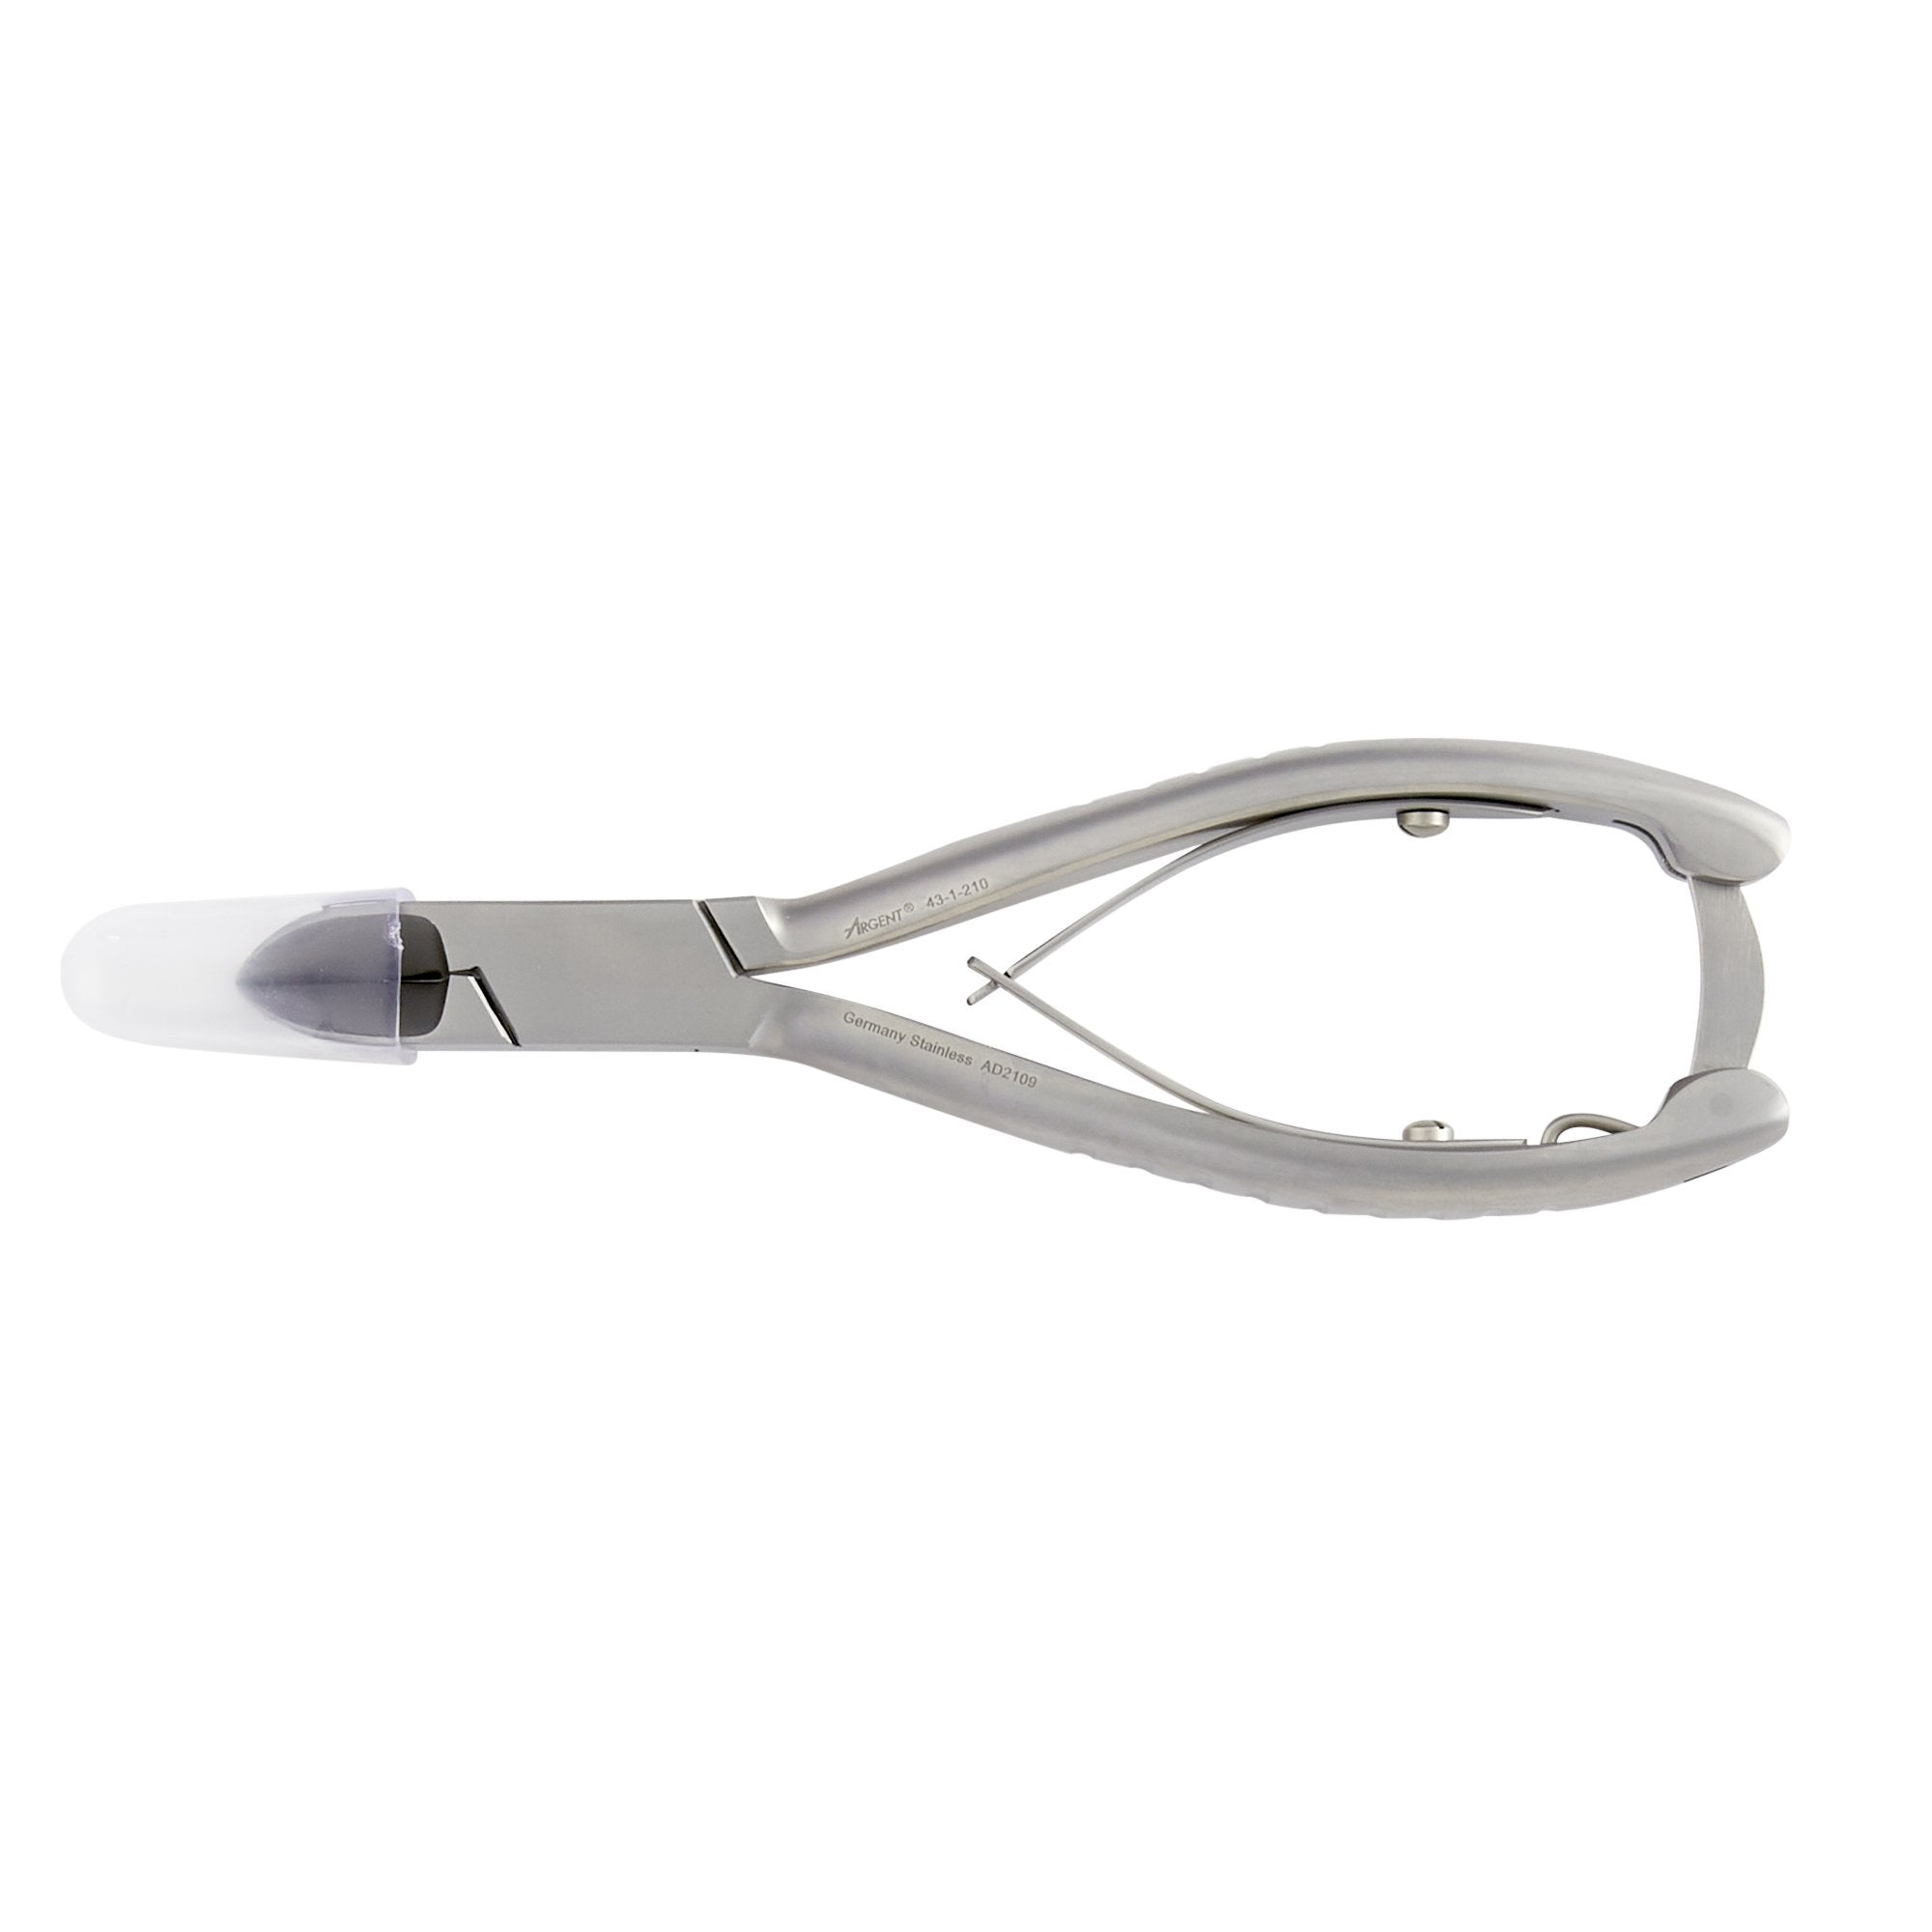 McKesson Argent? Nail Nipper, Concave Jaws, 5? Inches